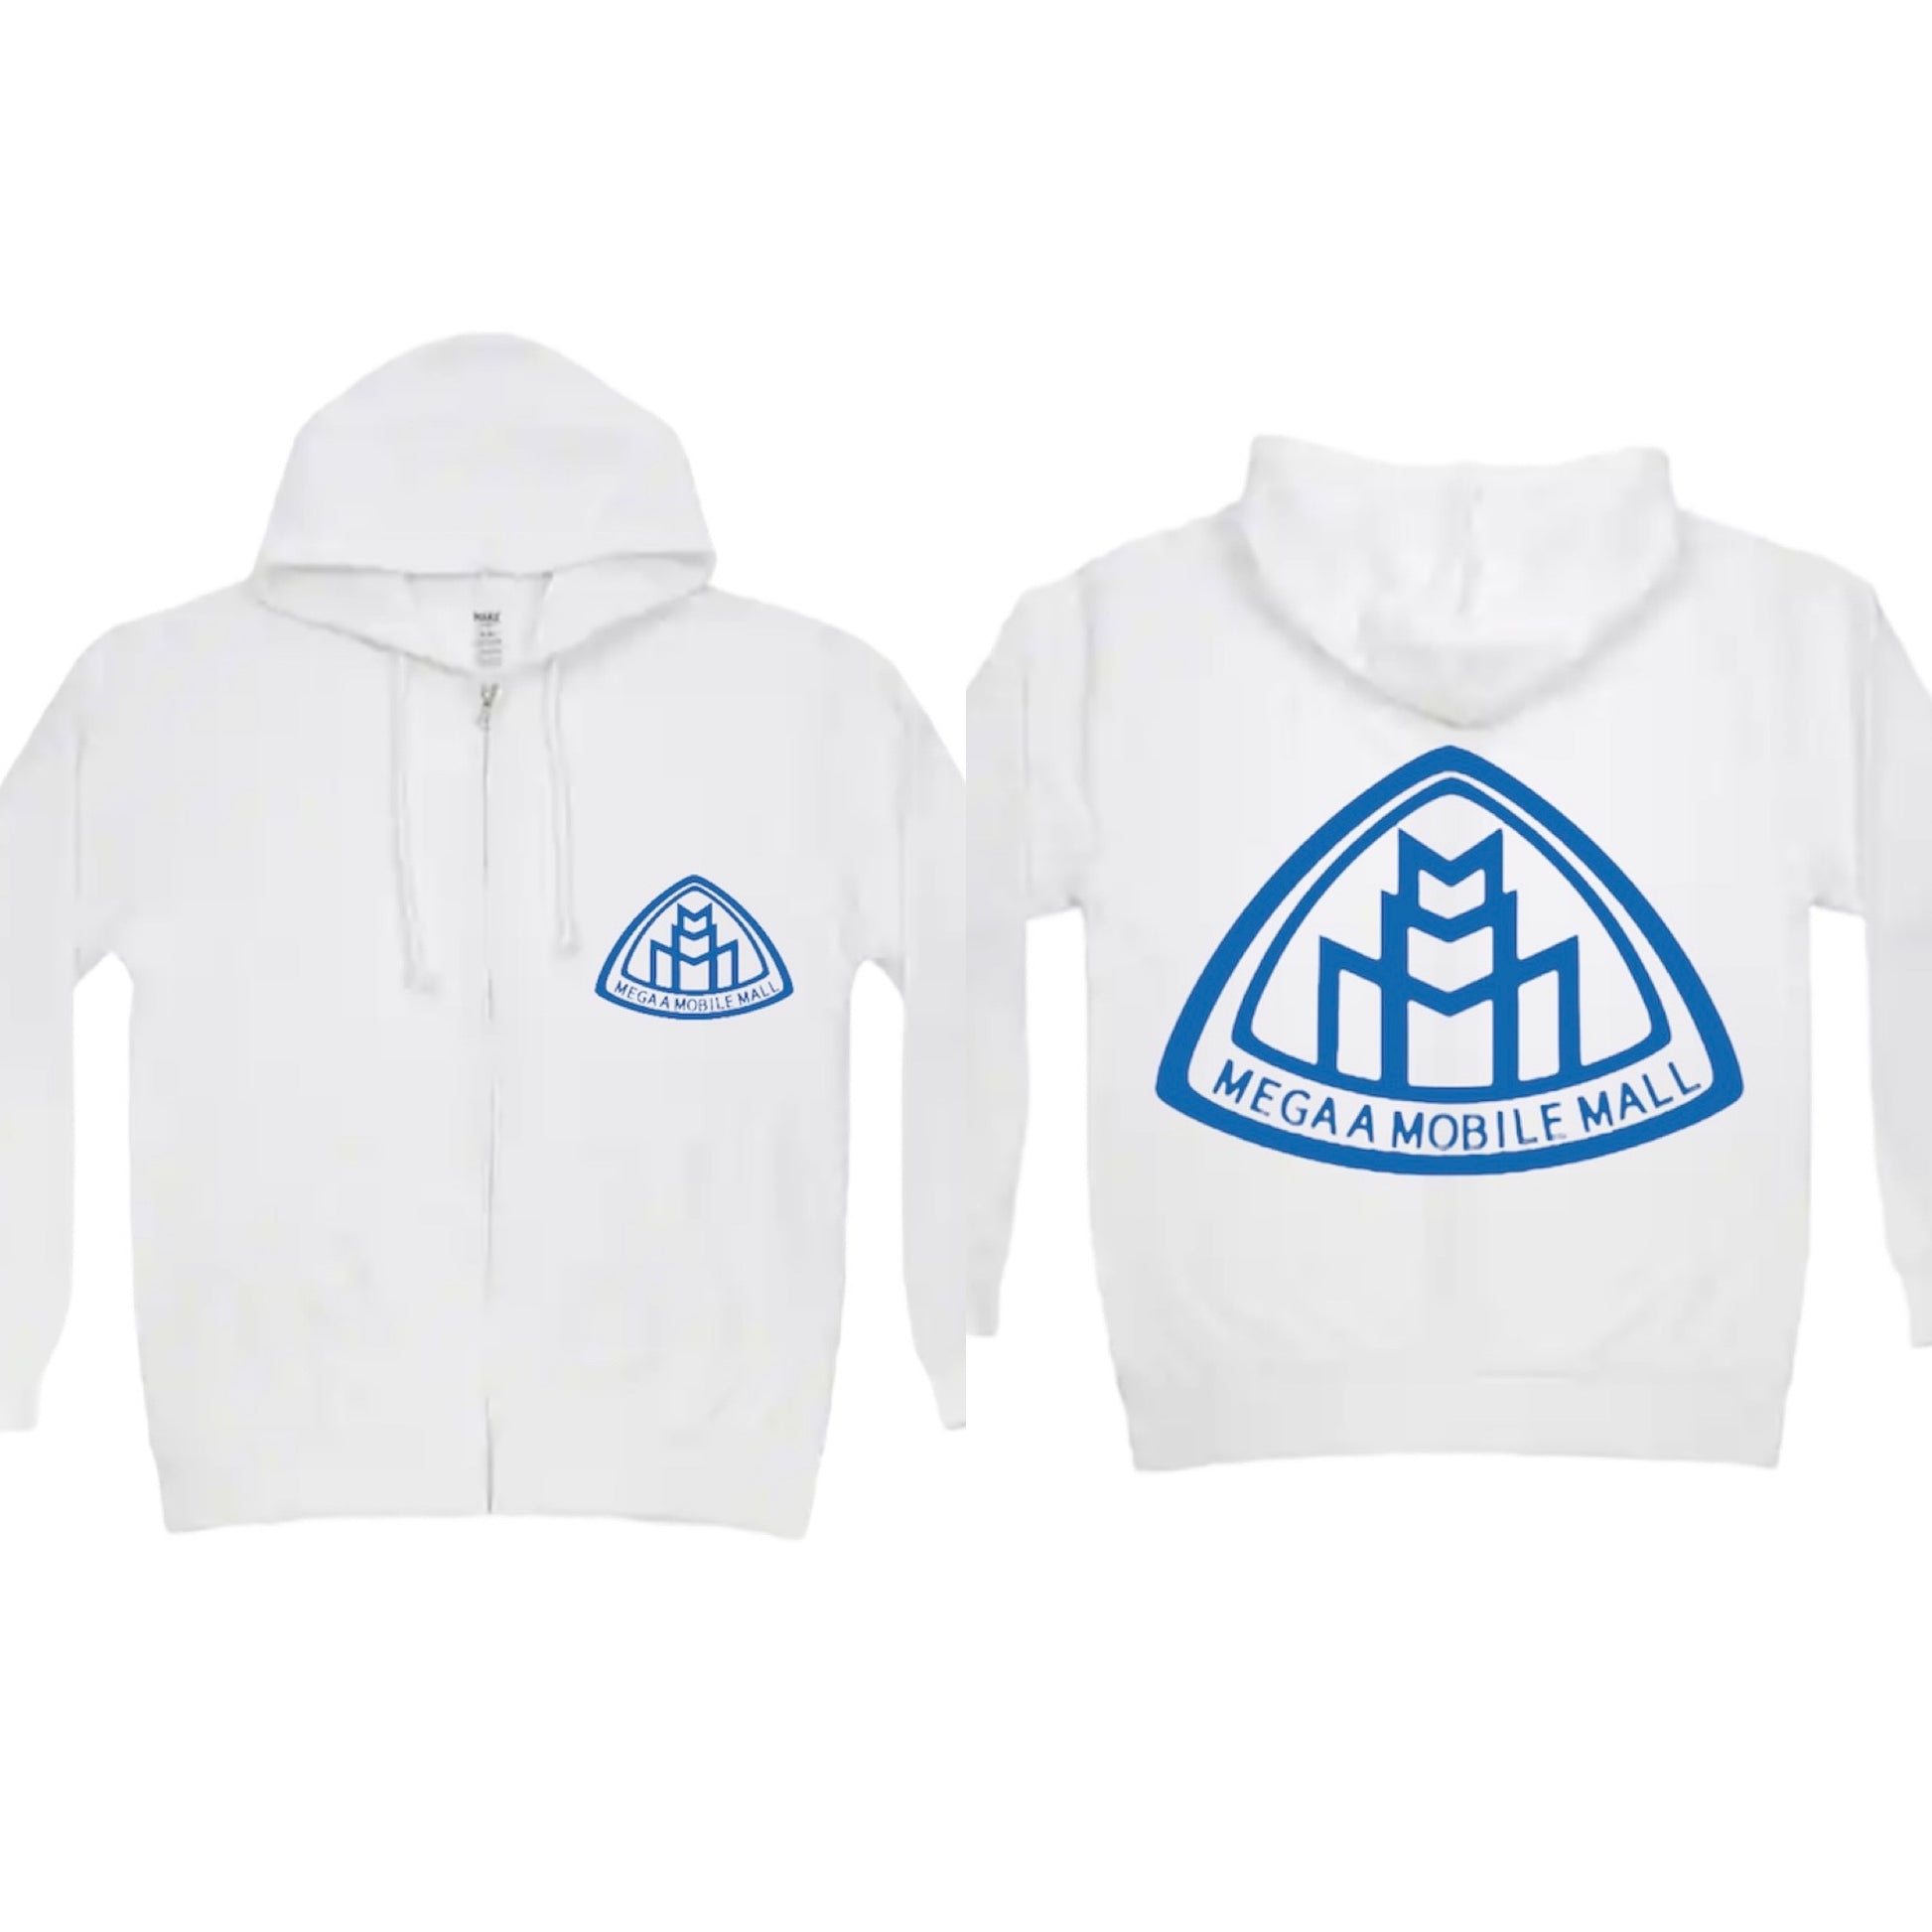 megaamobilemall white zip up hoodie with blue logo